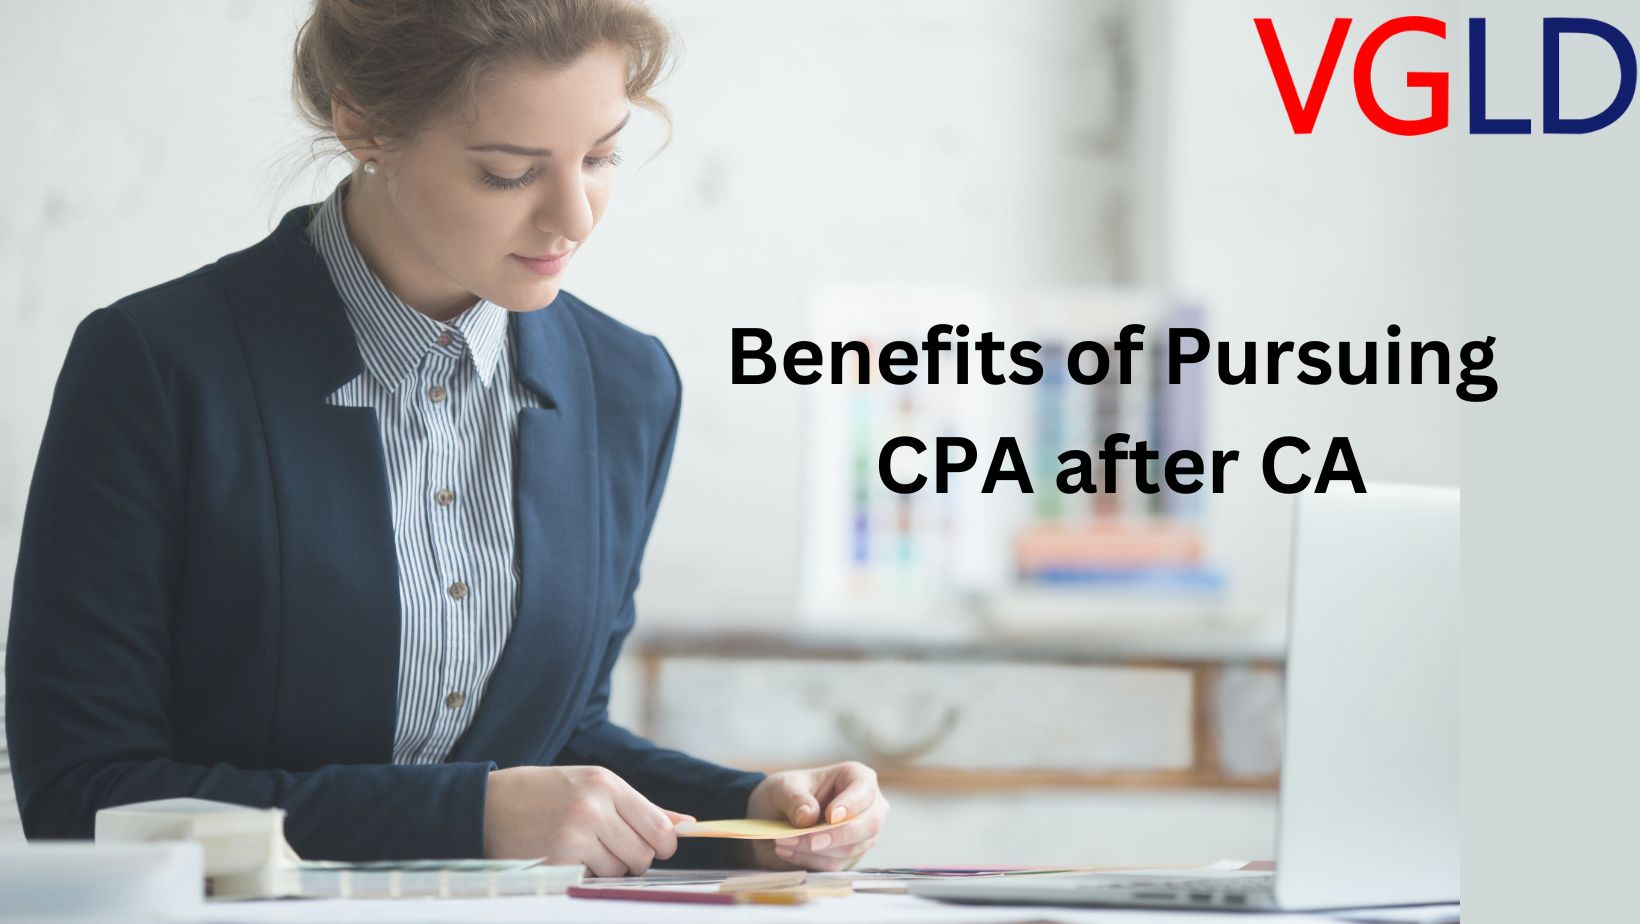 Benefits of Pursuing CPA after CA